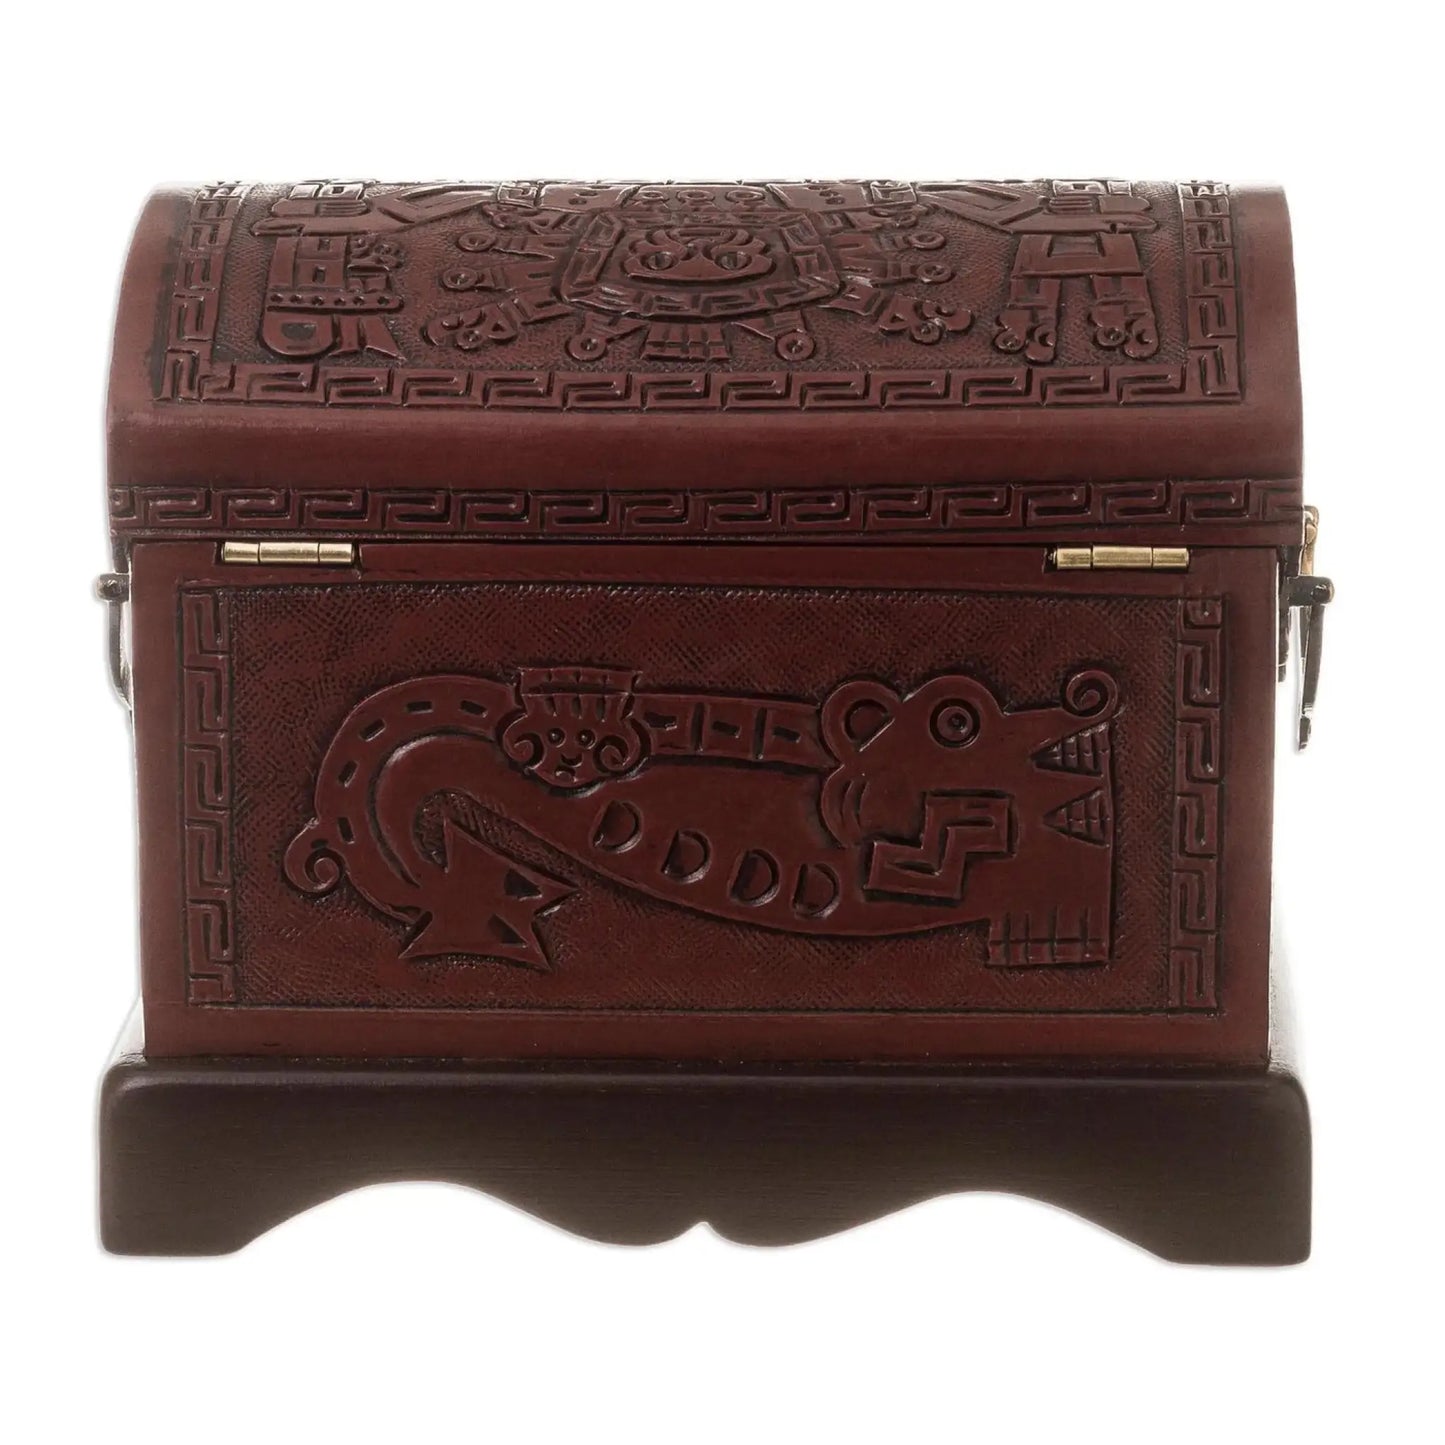 God of Wands - Hand Tooled Leather Jewelry Chest - Art